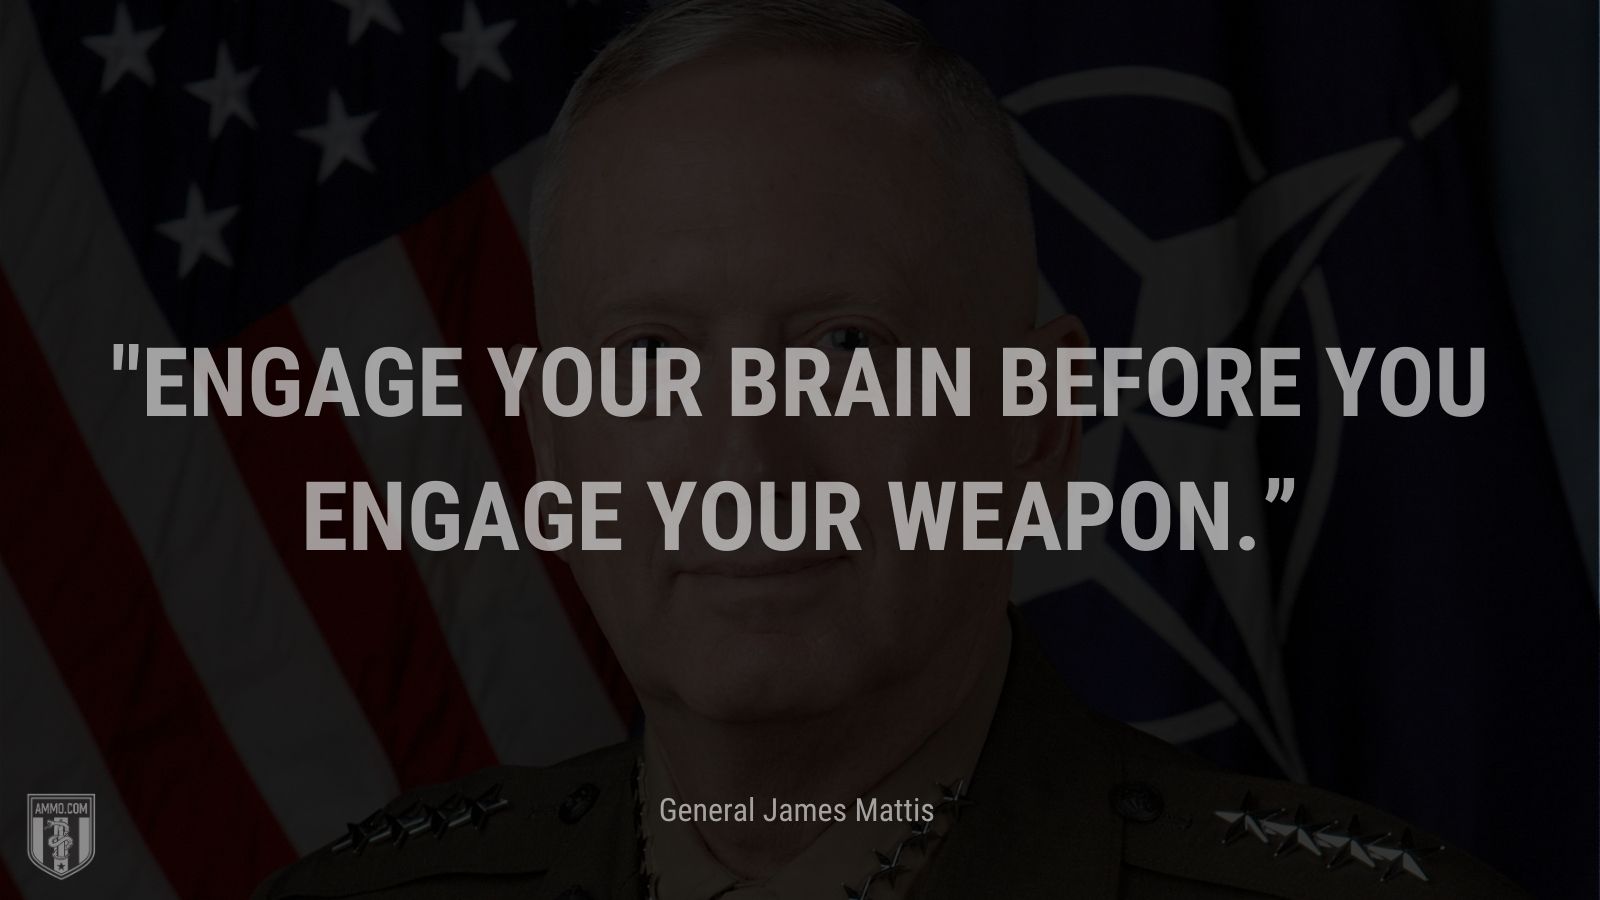 “Engage your brain before you engage your weapon.” - General James Mattis